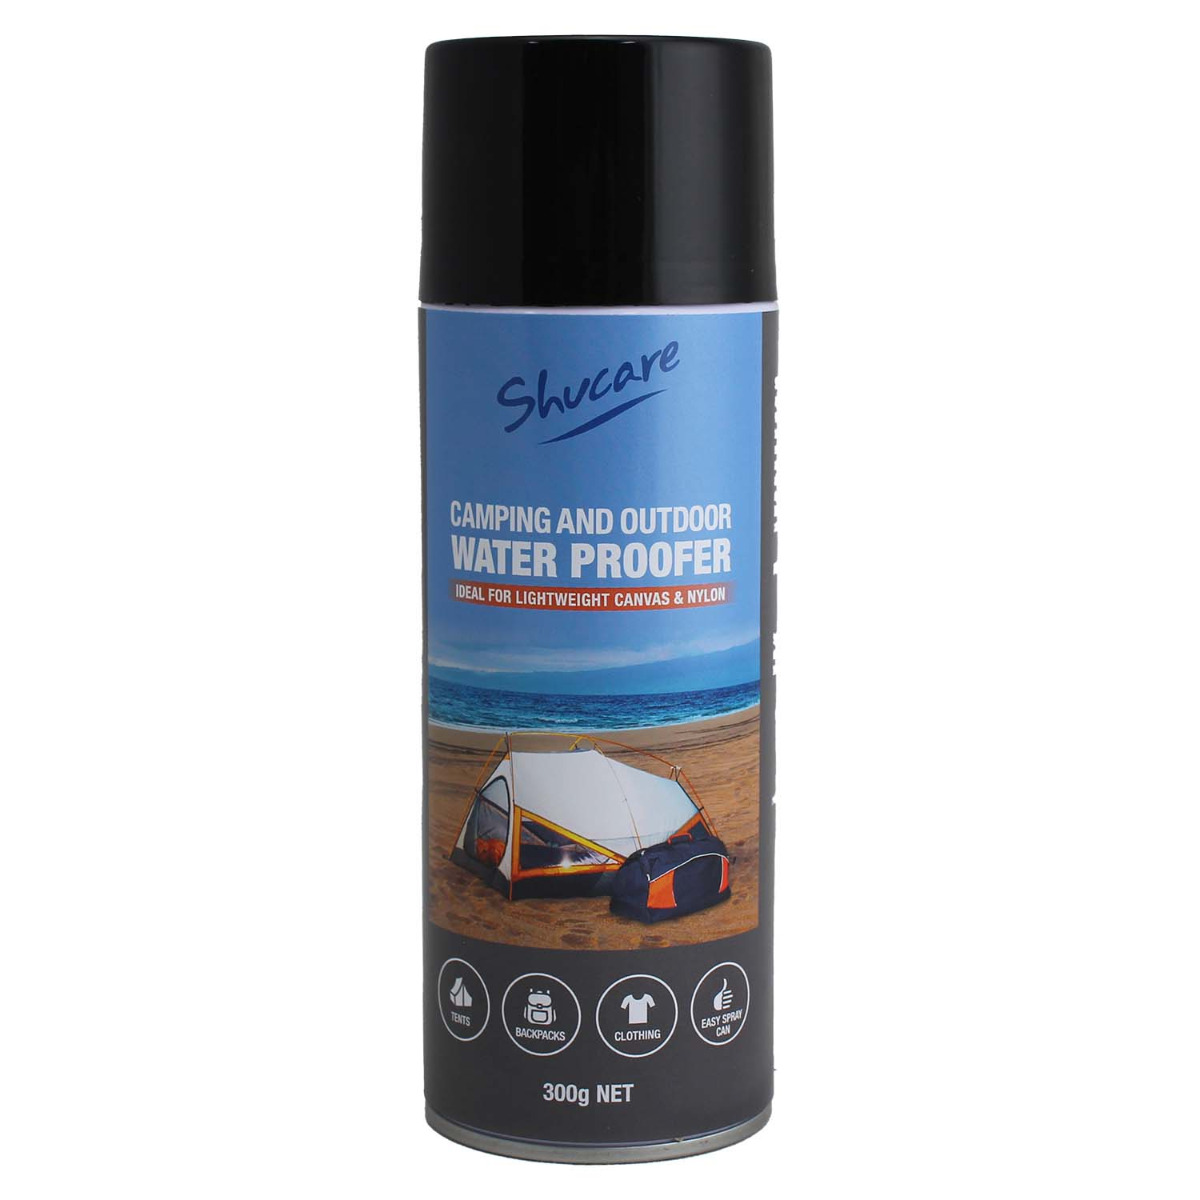 Shucare camping and outdoor Water proofer